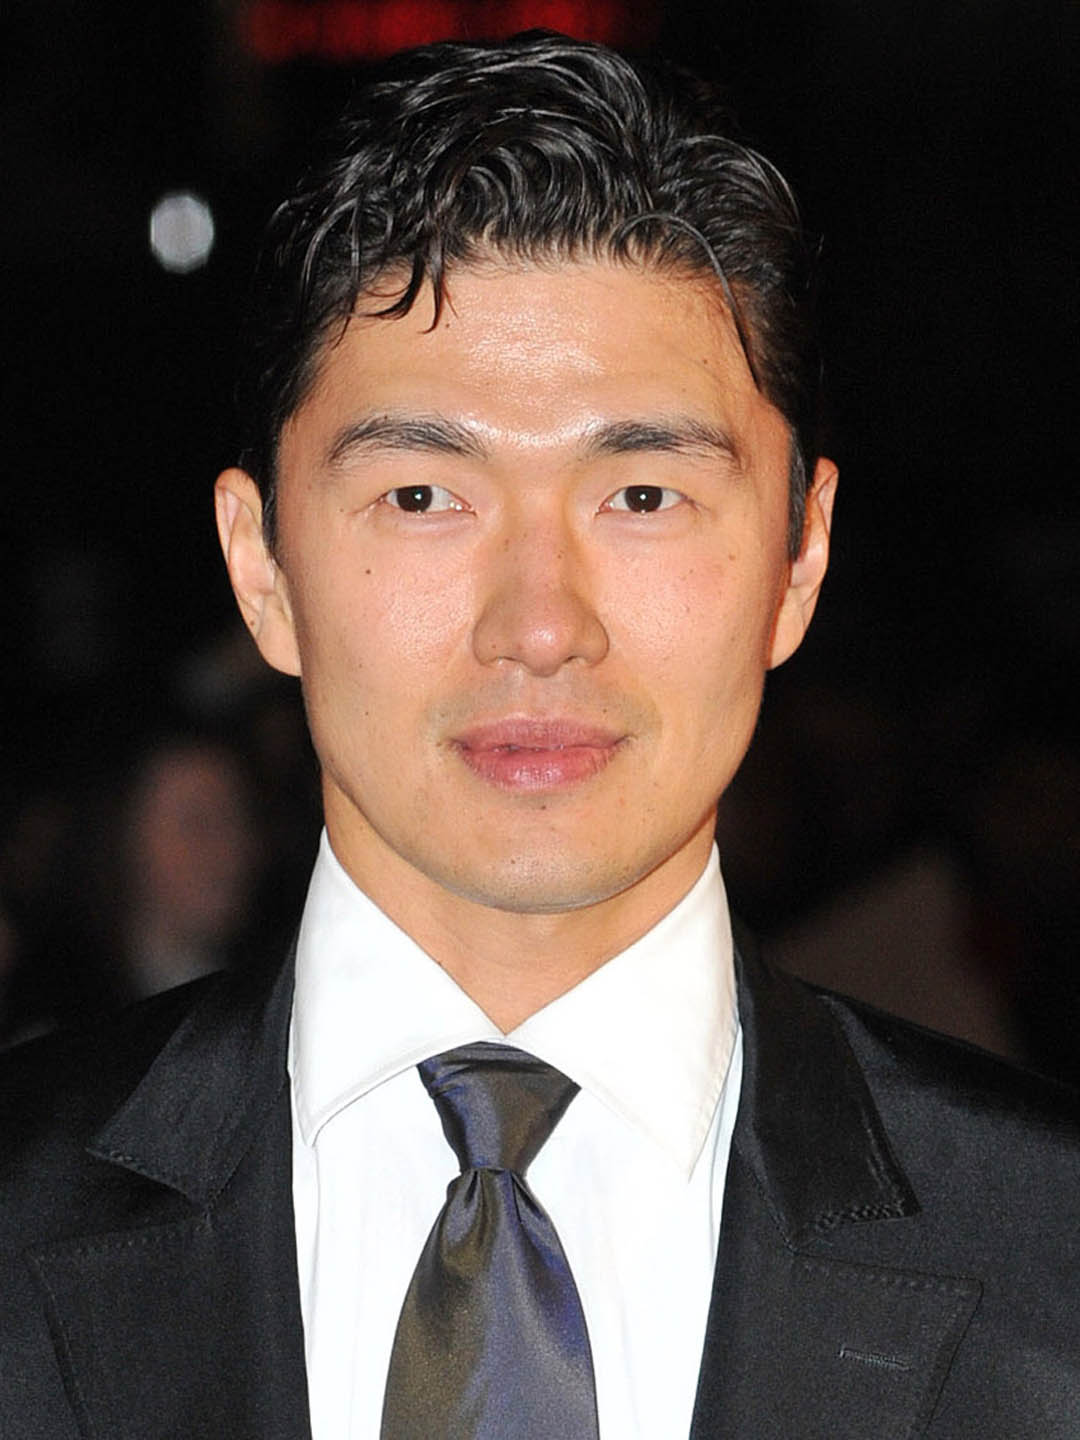 How tall is Rick Yune?